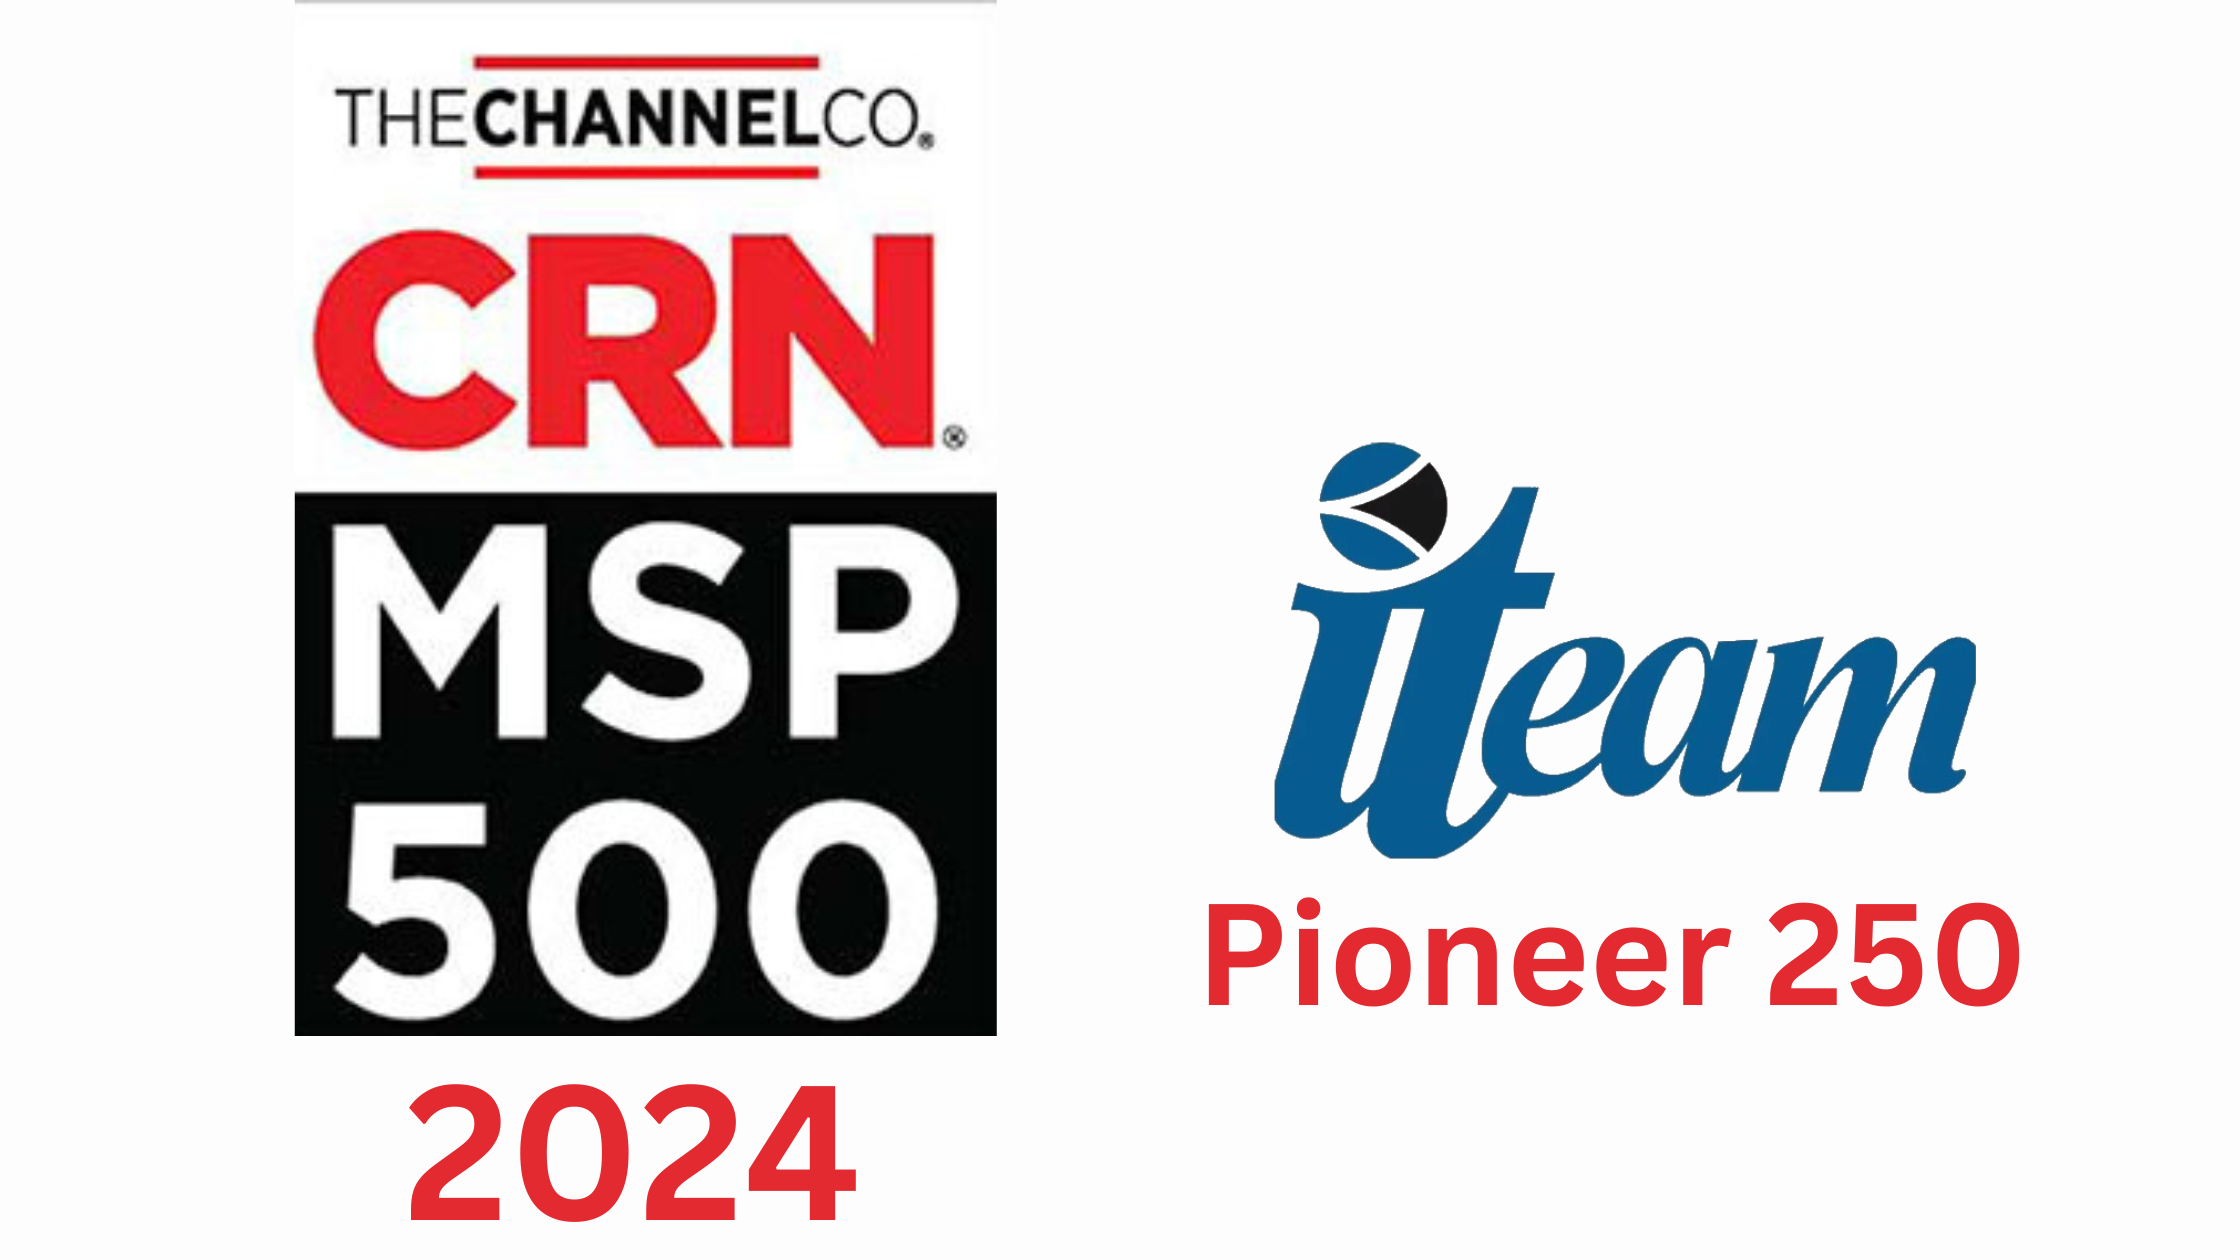 The ITeam CRN MSP 500 pioneer 250 2024